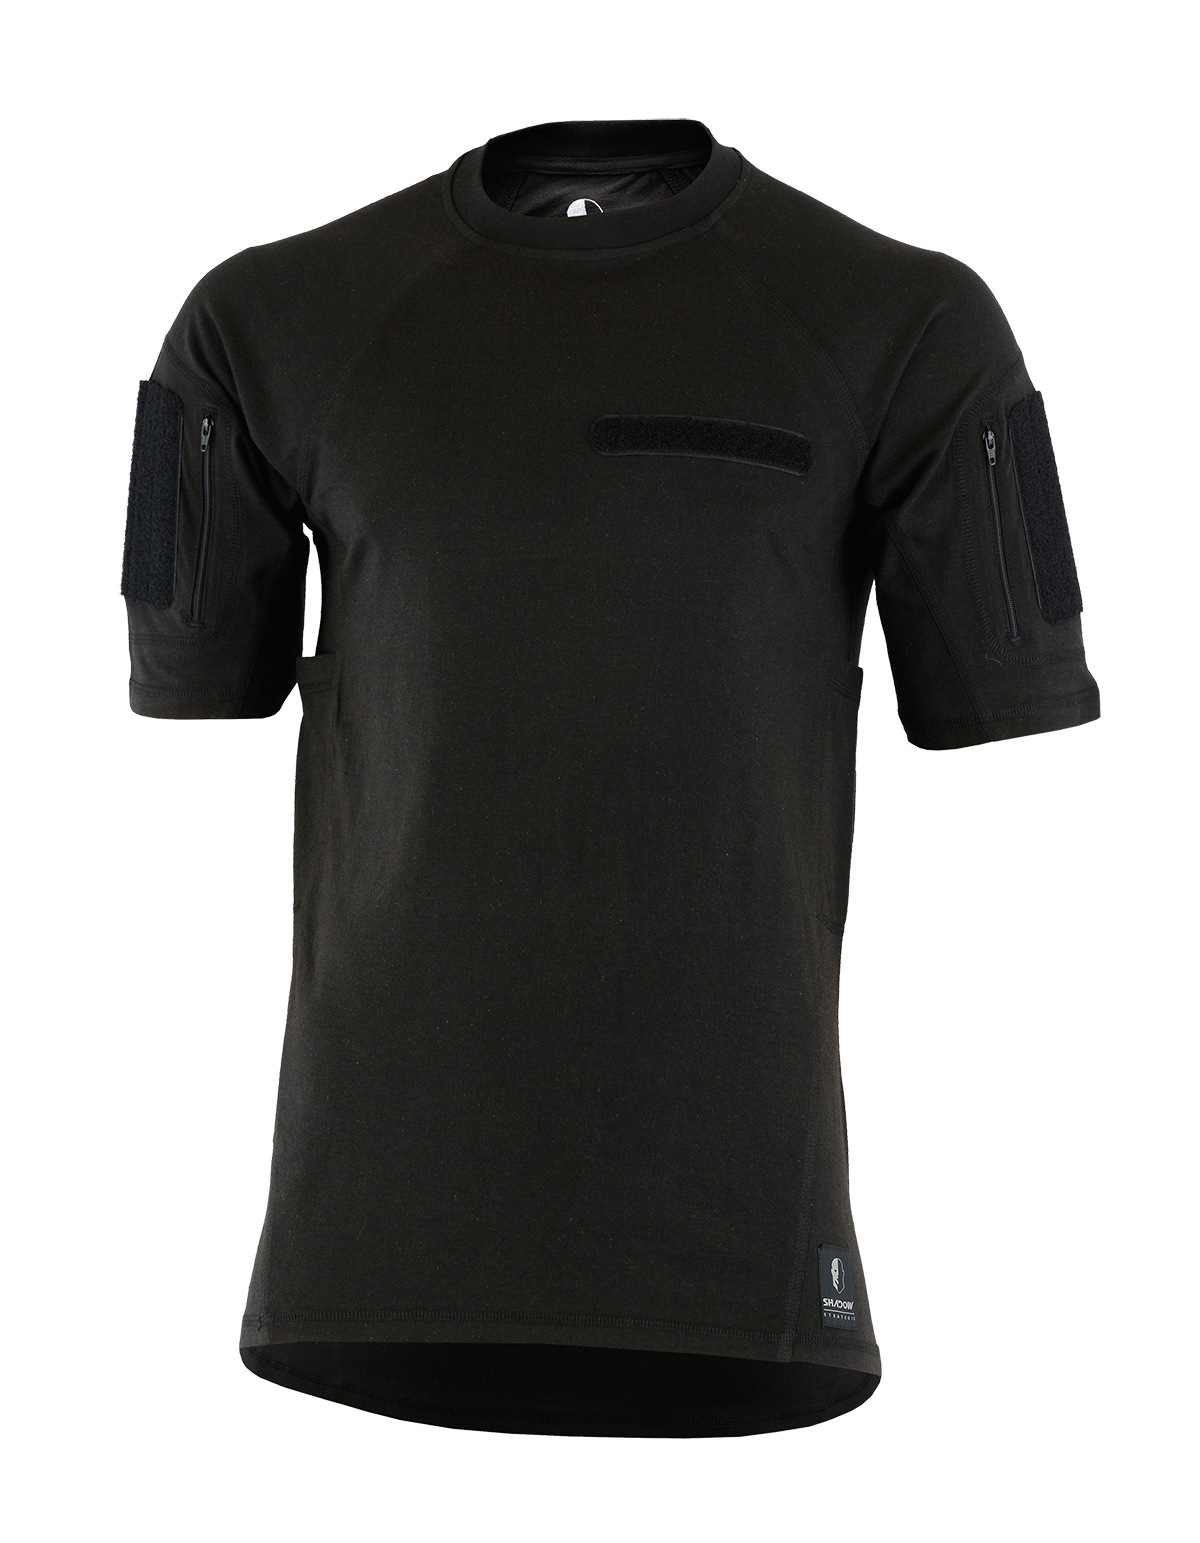 Tactical Zone instructor shirt in Black Camo front